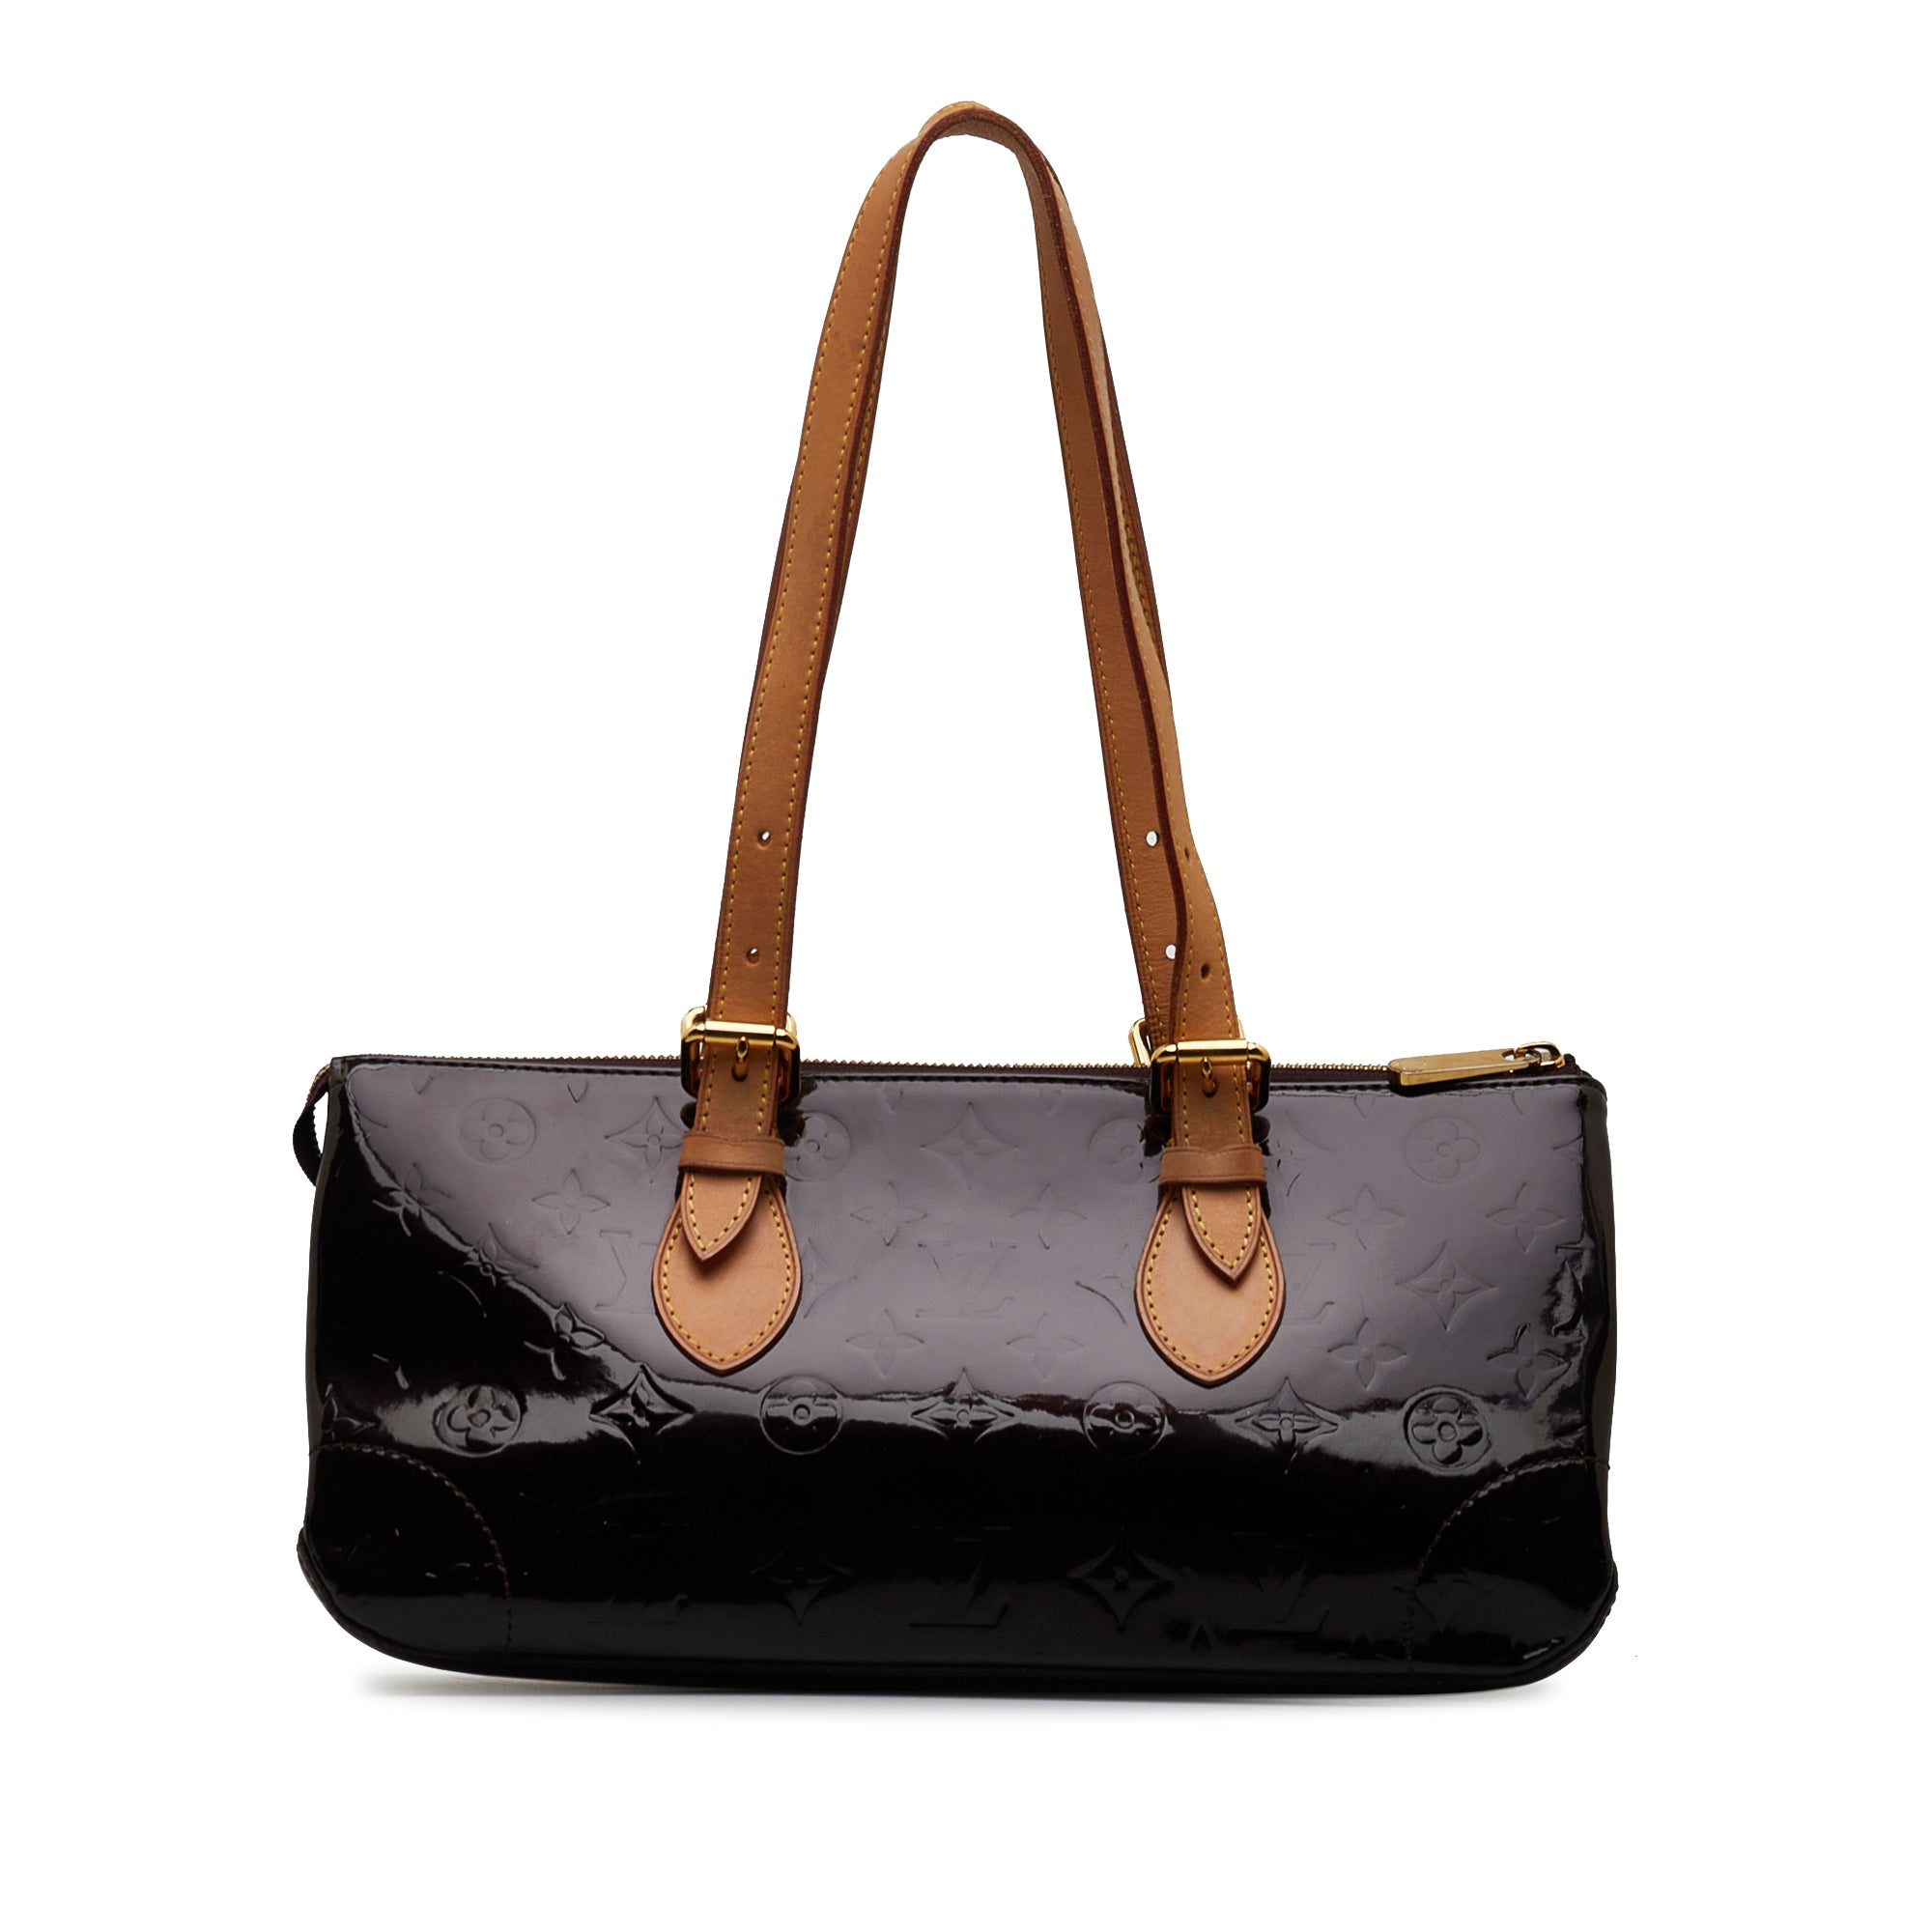 Shop for Louis Vuitton Amarante Vernis Leather Rosewood Ave Bag - Shipped  from USA